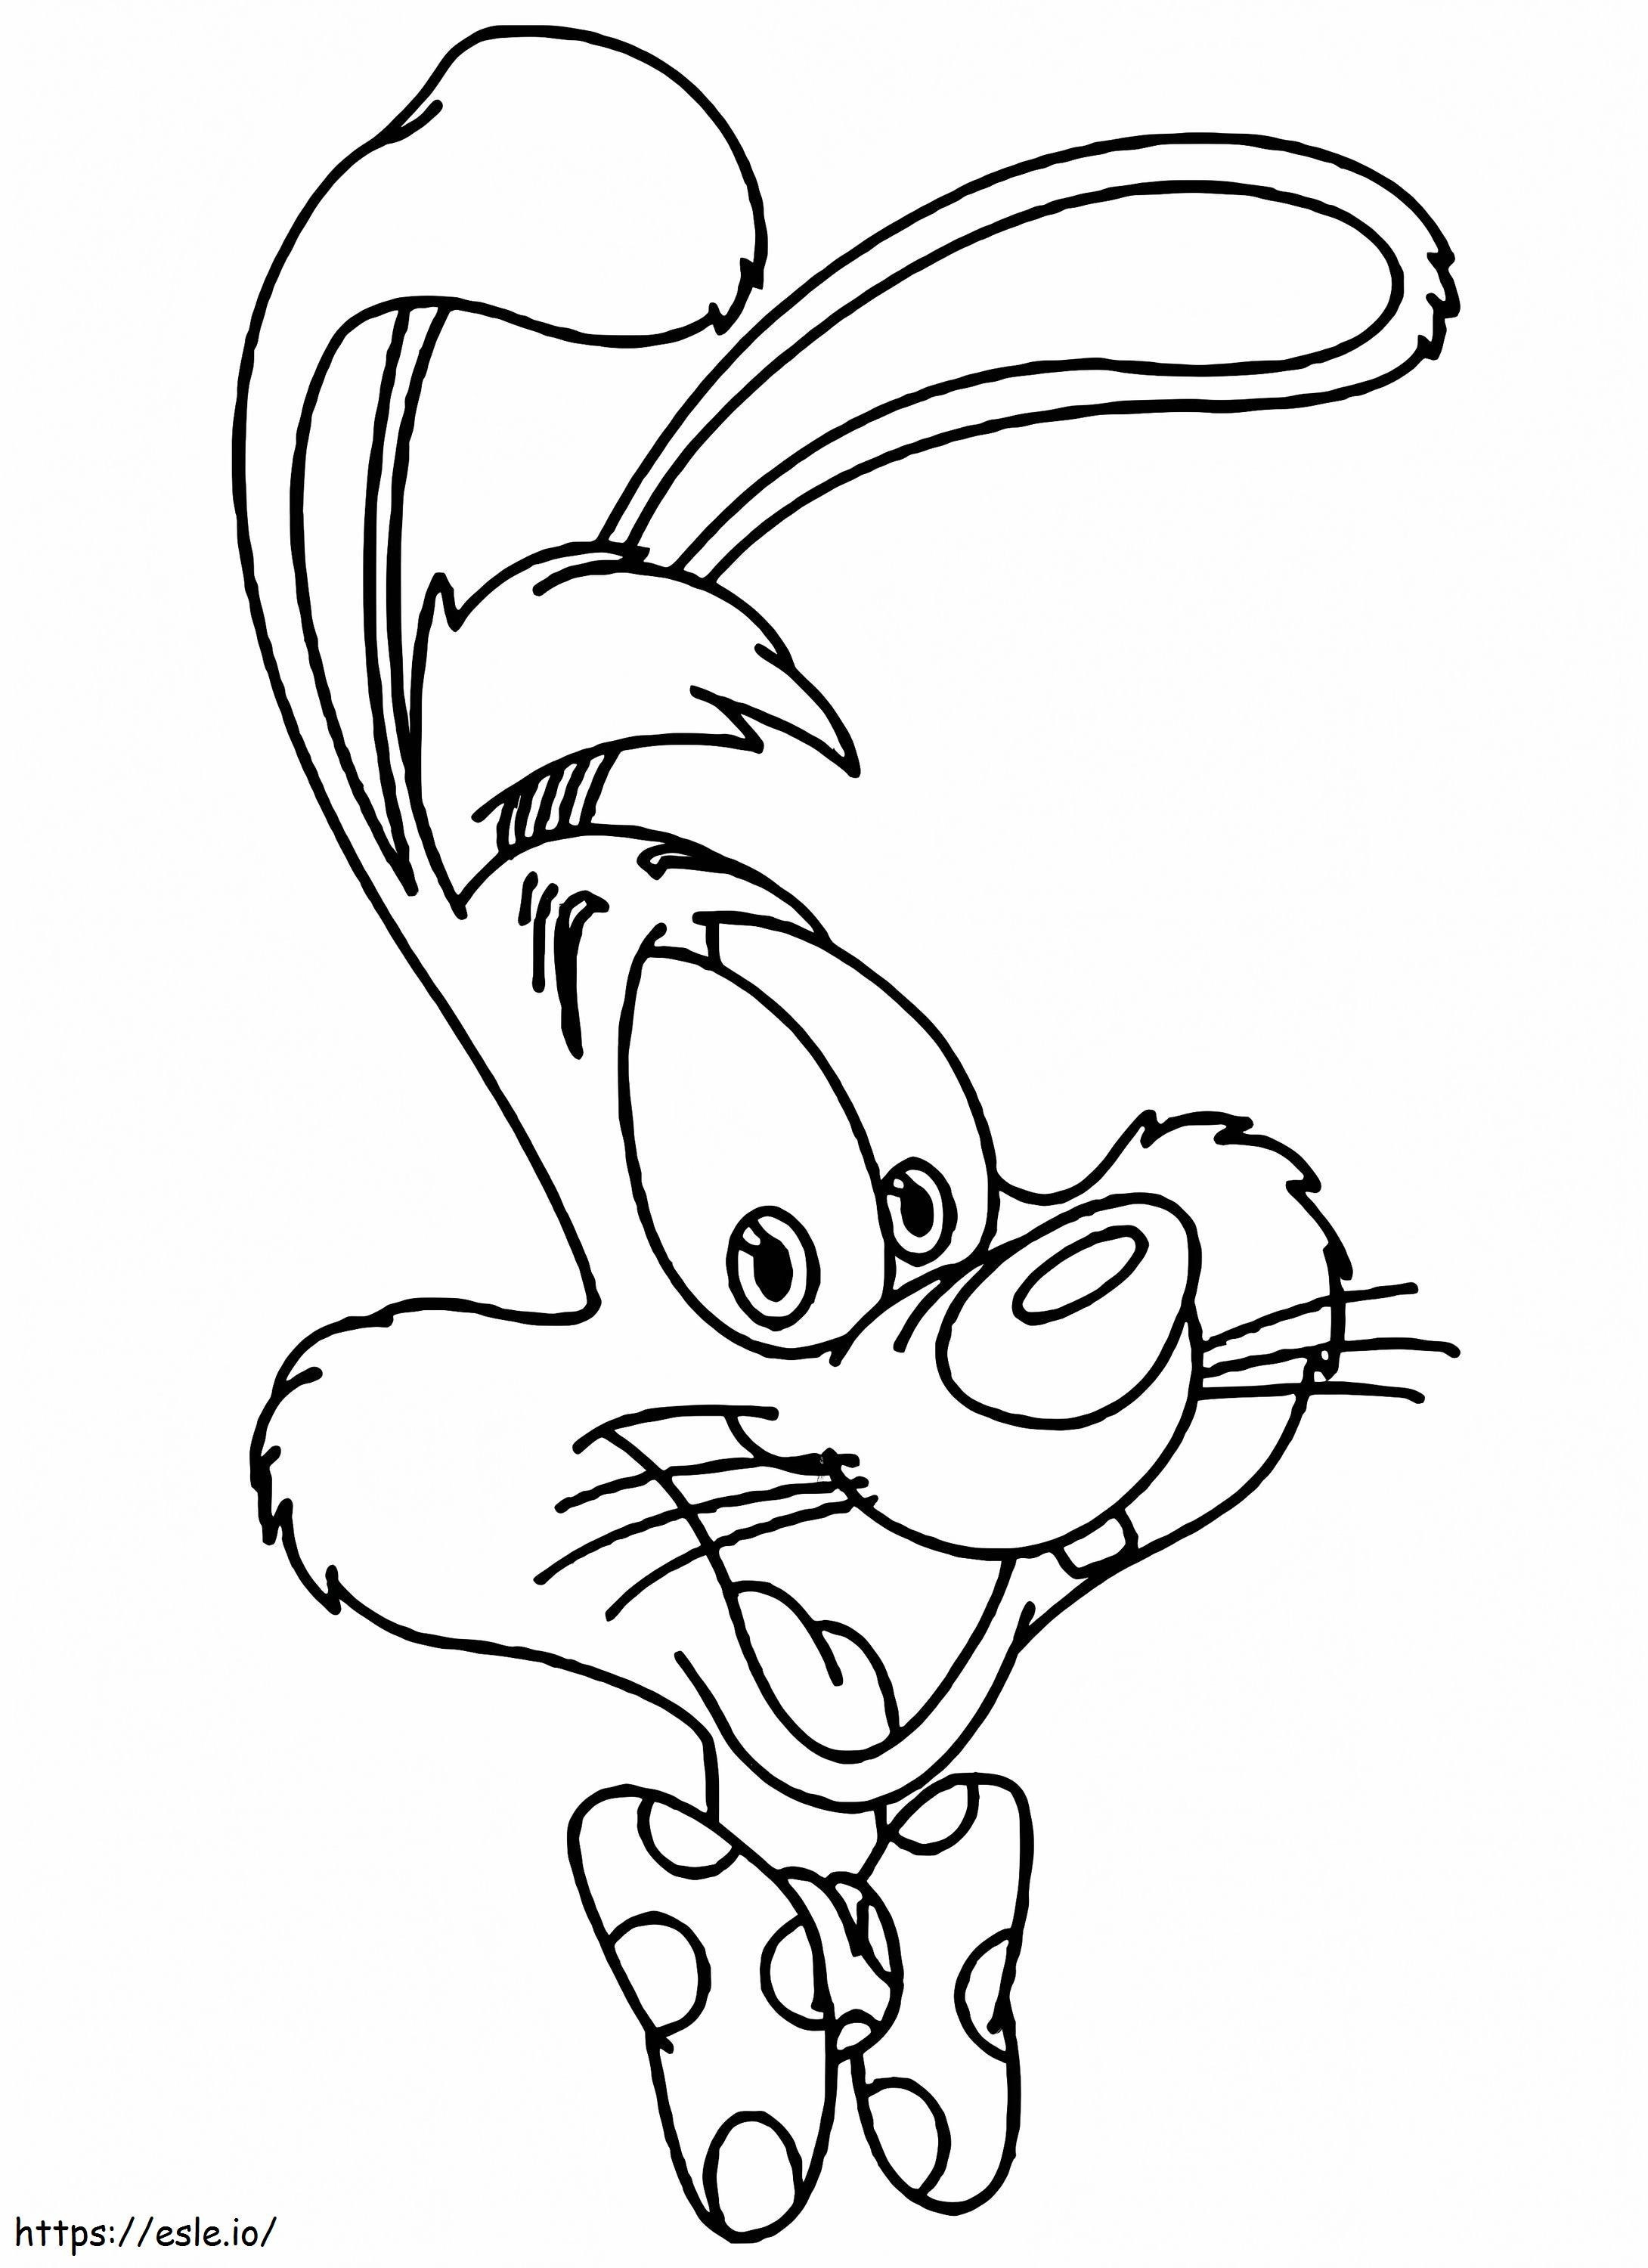 Roger Rabbit Face coloring page